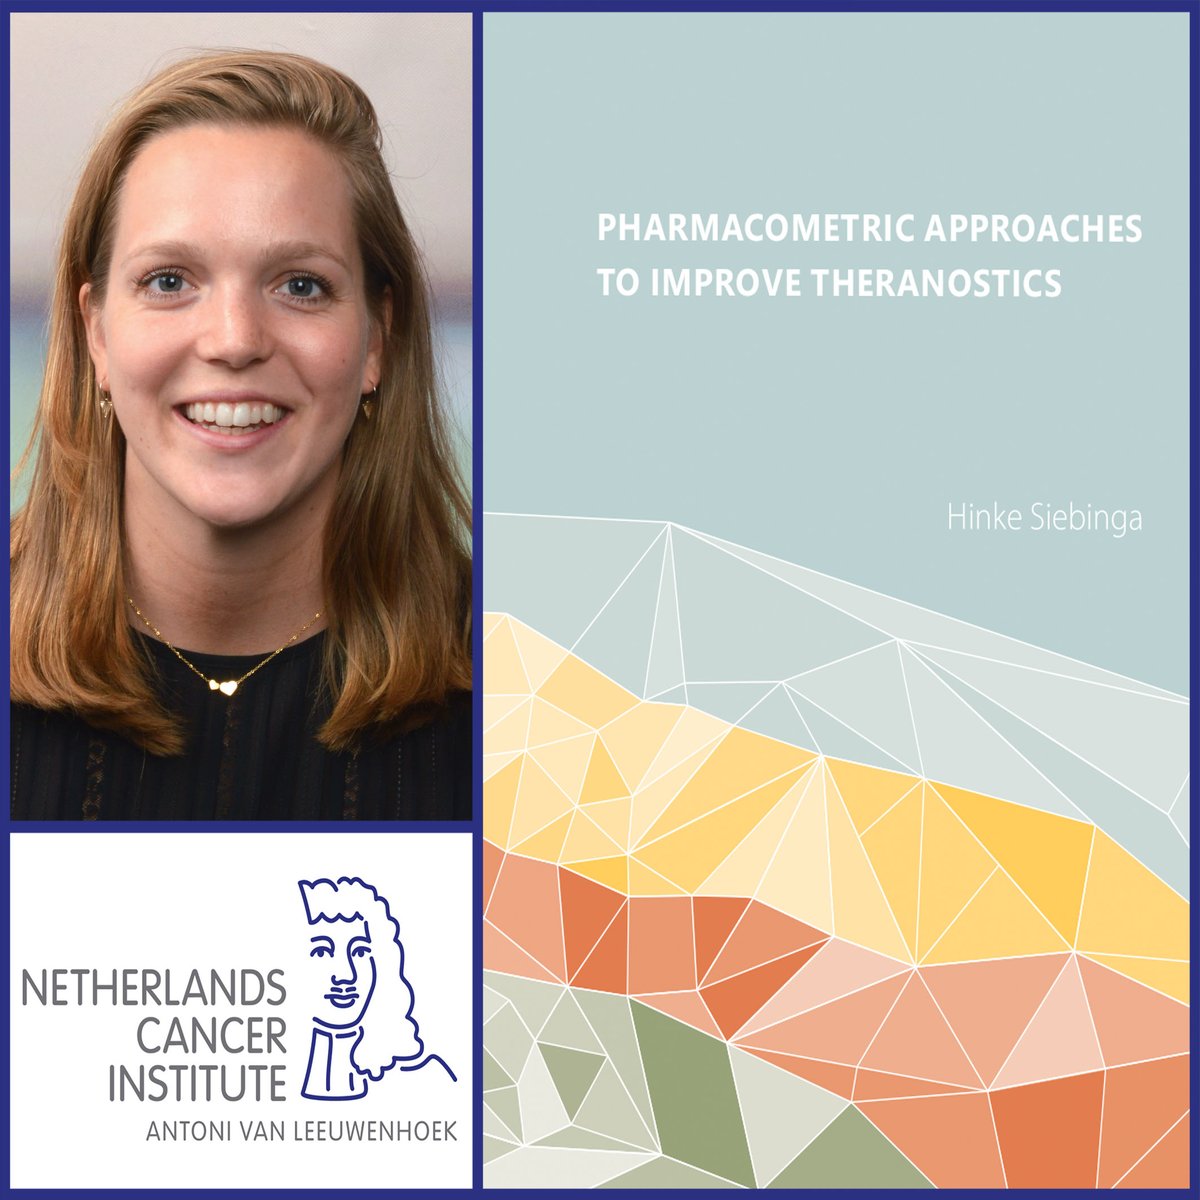 How do radioactive labeled medicines work in the human body? How do they remove tumors? Researcher Hinke Siebinga @hetAVL @uniutrecht tried to find an answer to these questions. She will defend her thesis on November 2 ➡️ bit.ly/3sbOhWa